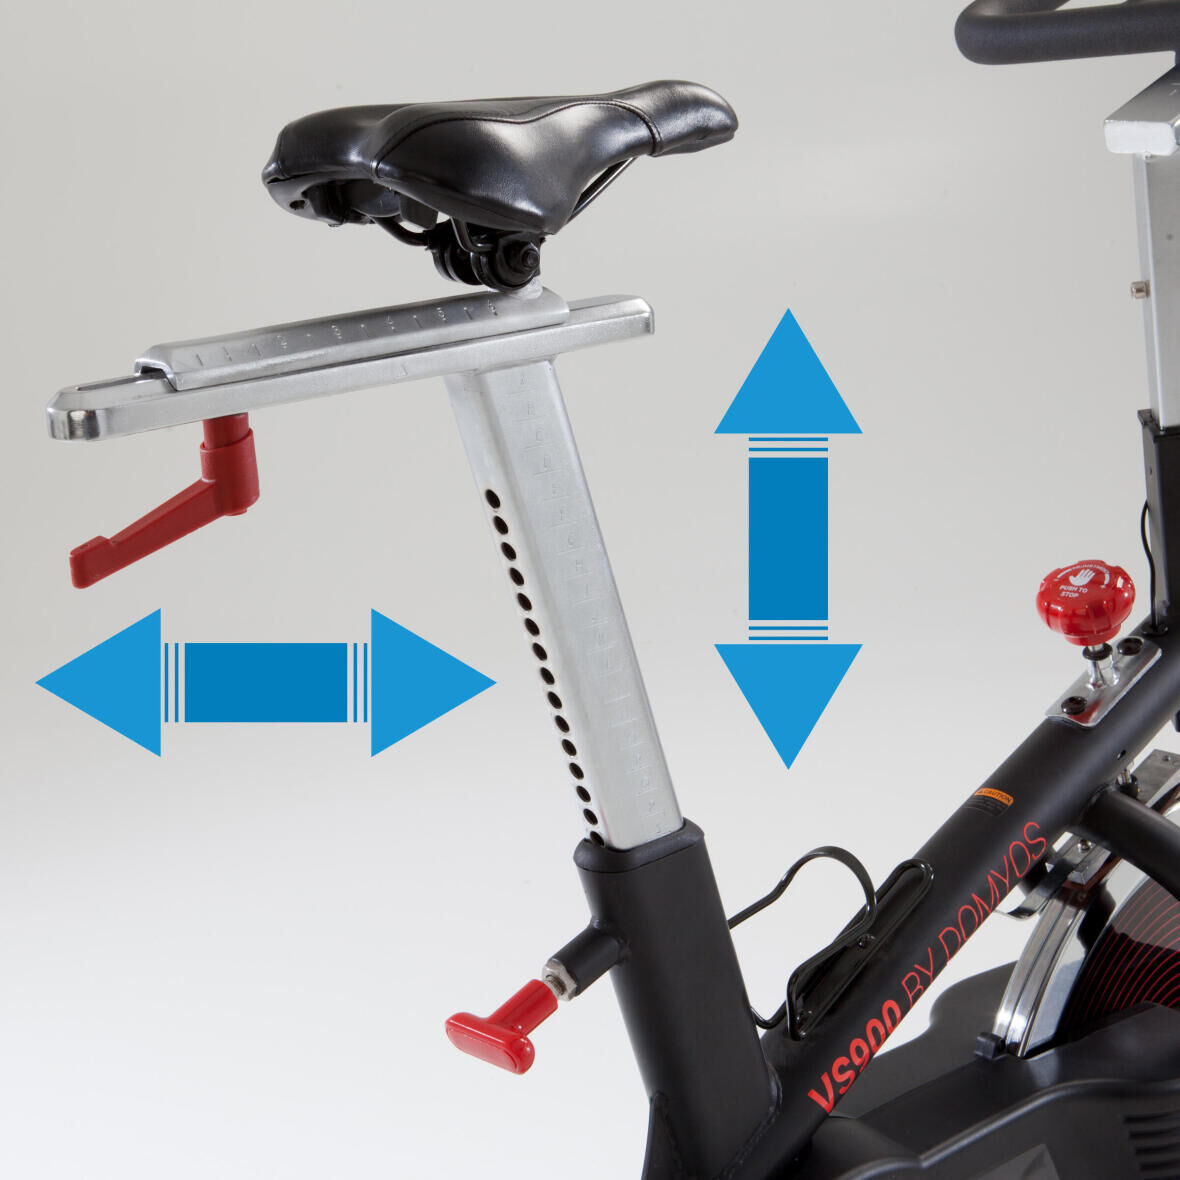 differences spin exercise bike